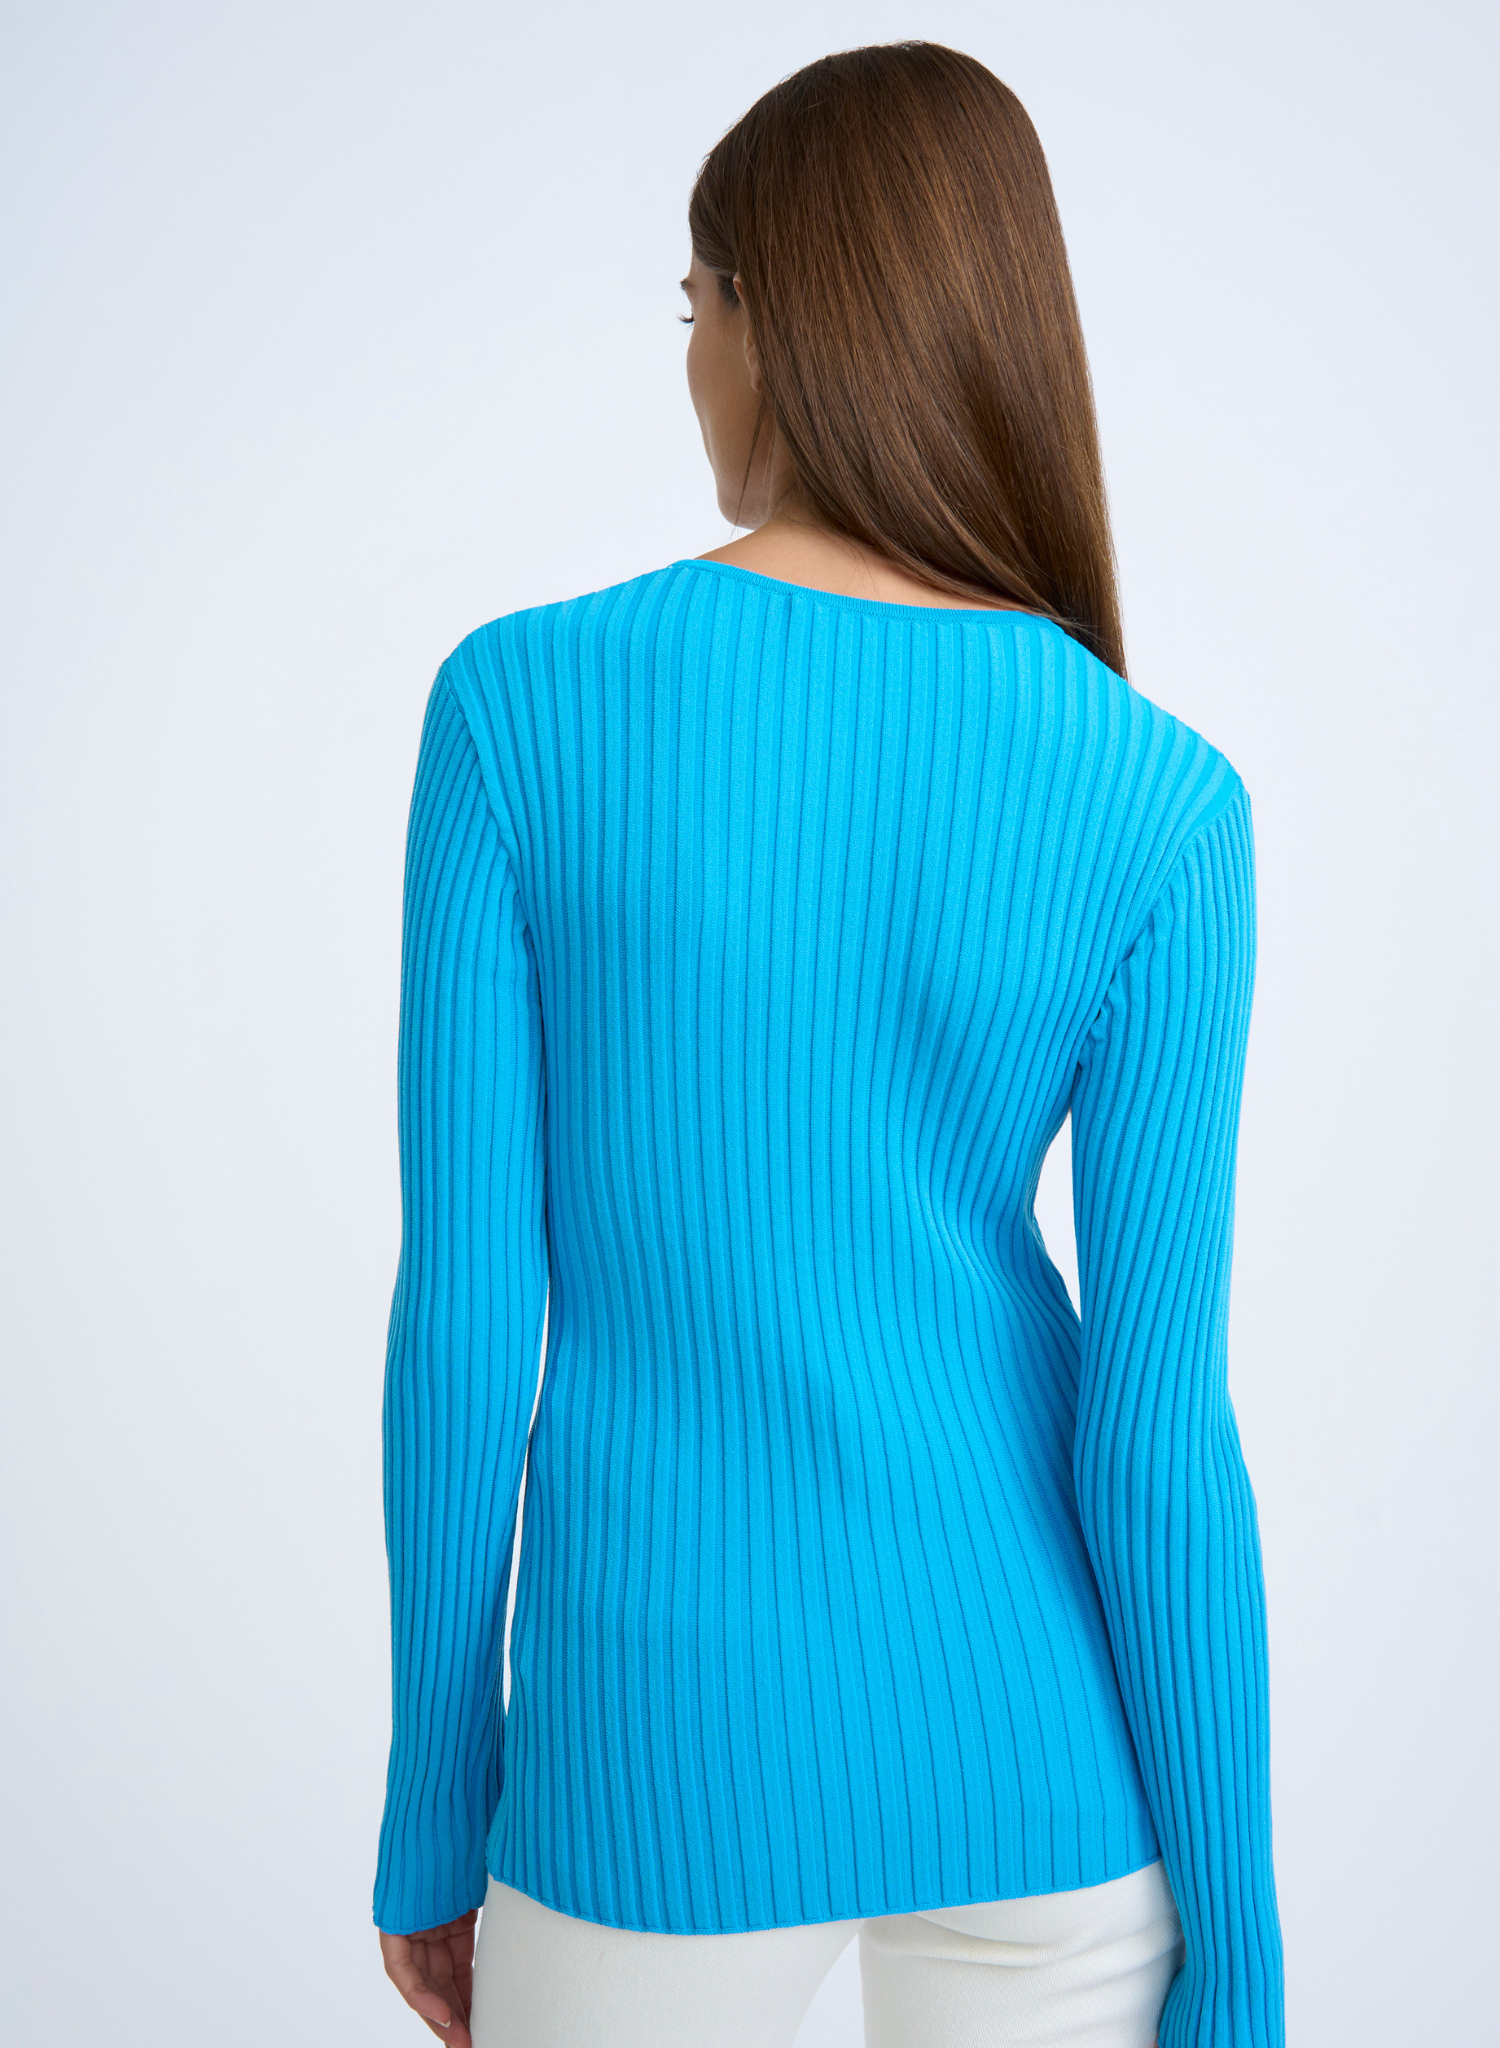 The Jenny Jayne Cardi brings fun and excitement into your winter wardrobe. Featuring a flattering v neckline with hook and eye closures down the centre front, this staple is crafted from a mid weight rib knit fabrication to make it the versatile layer for all year round.